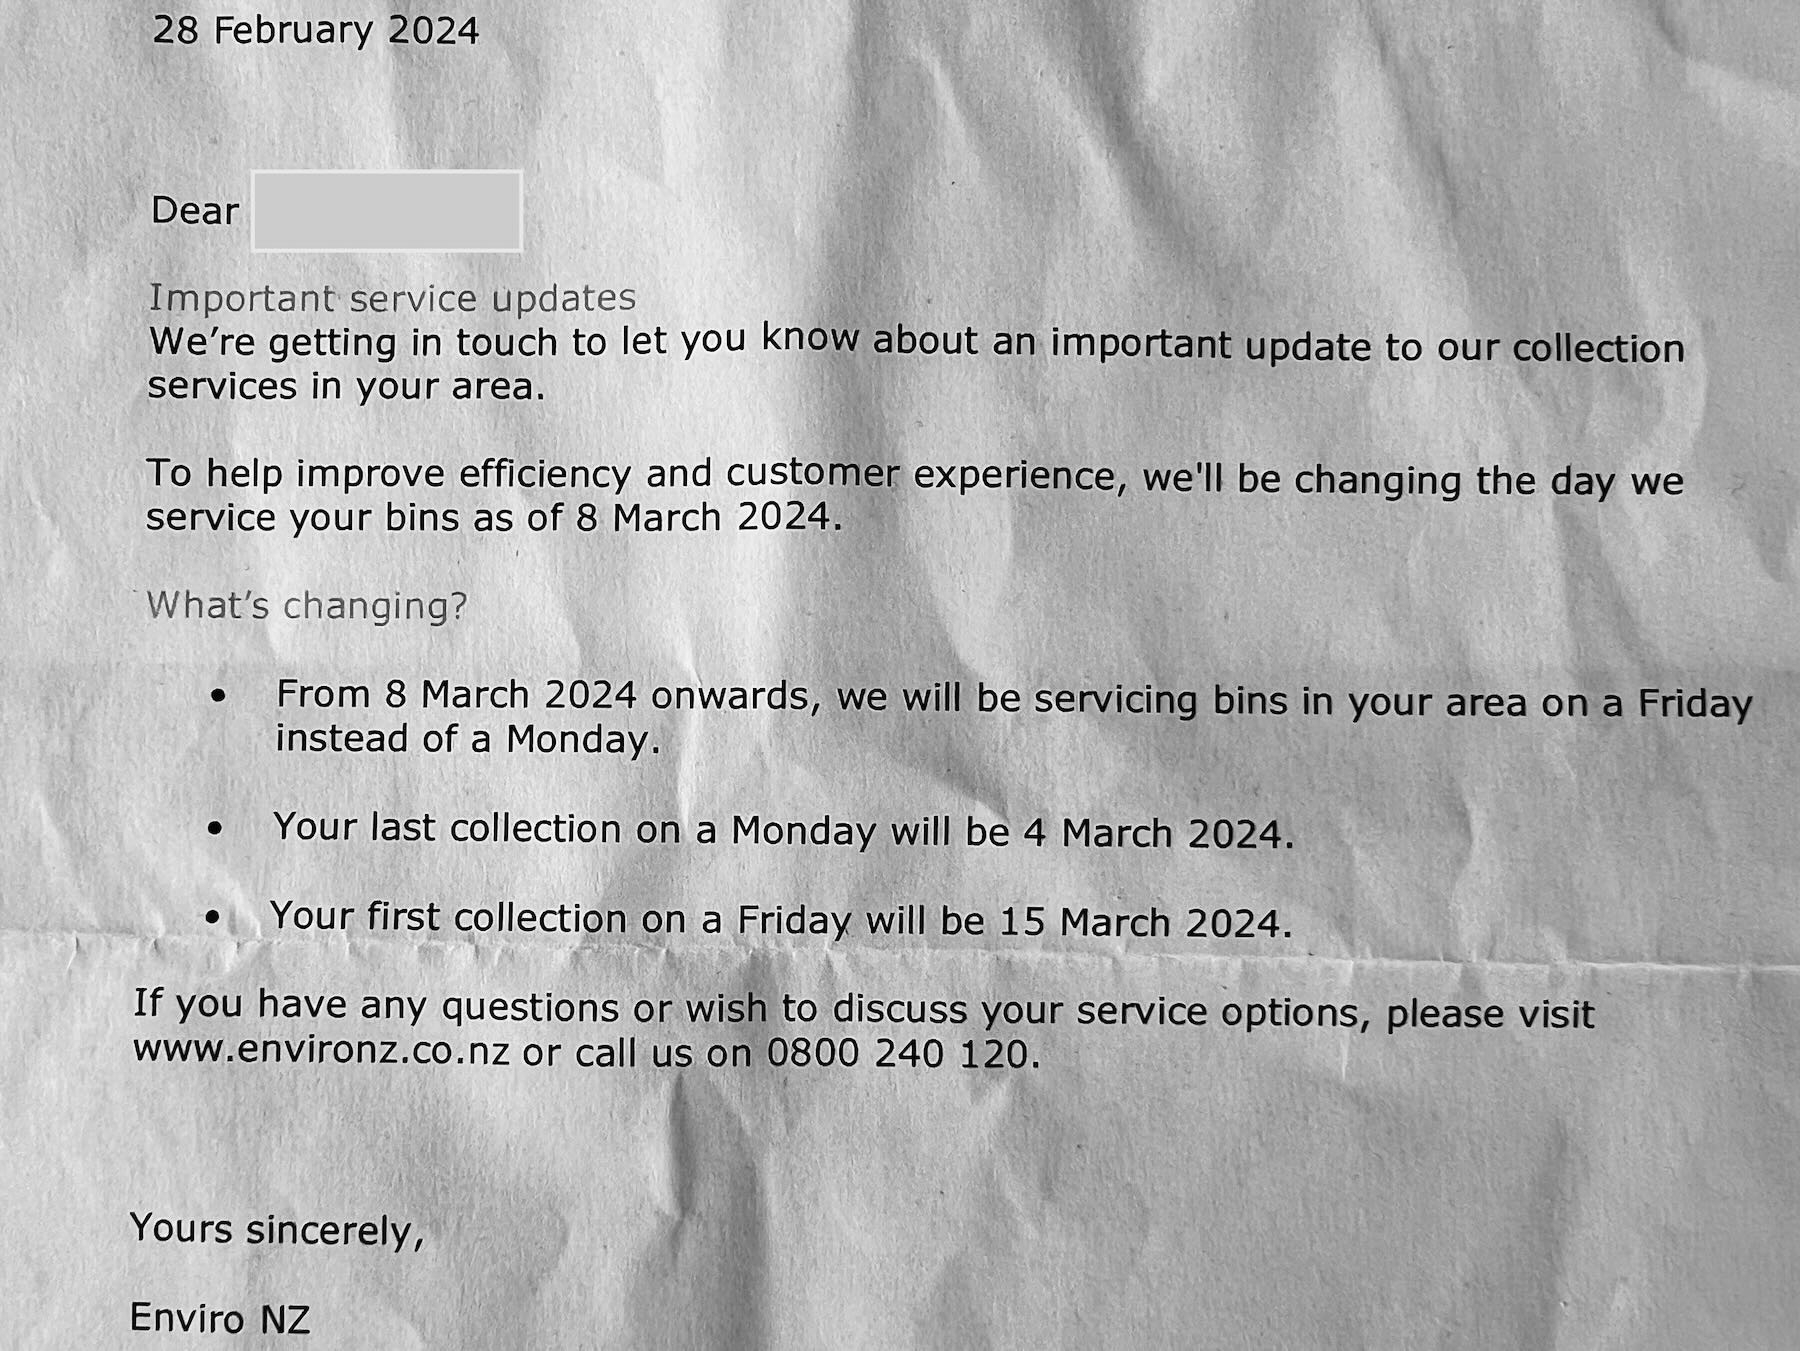 Rubbish collection change letter.